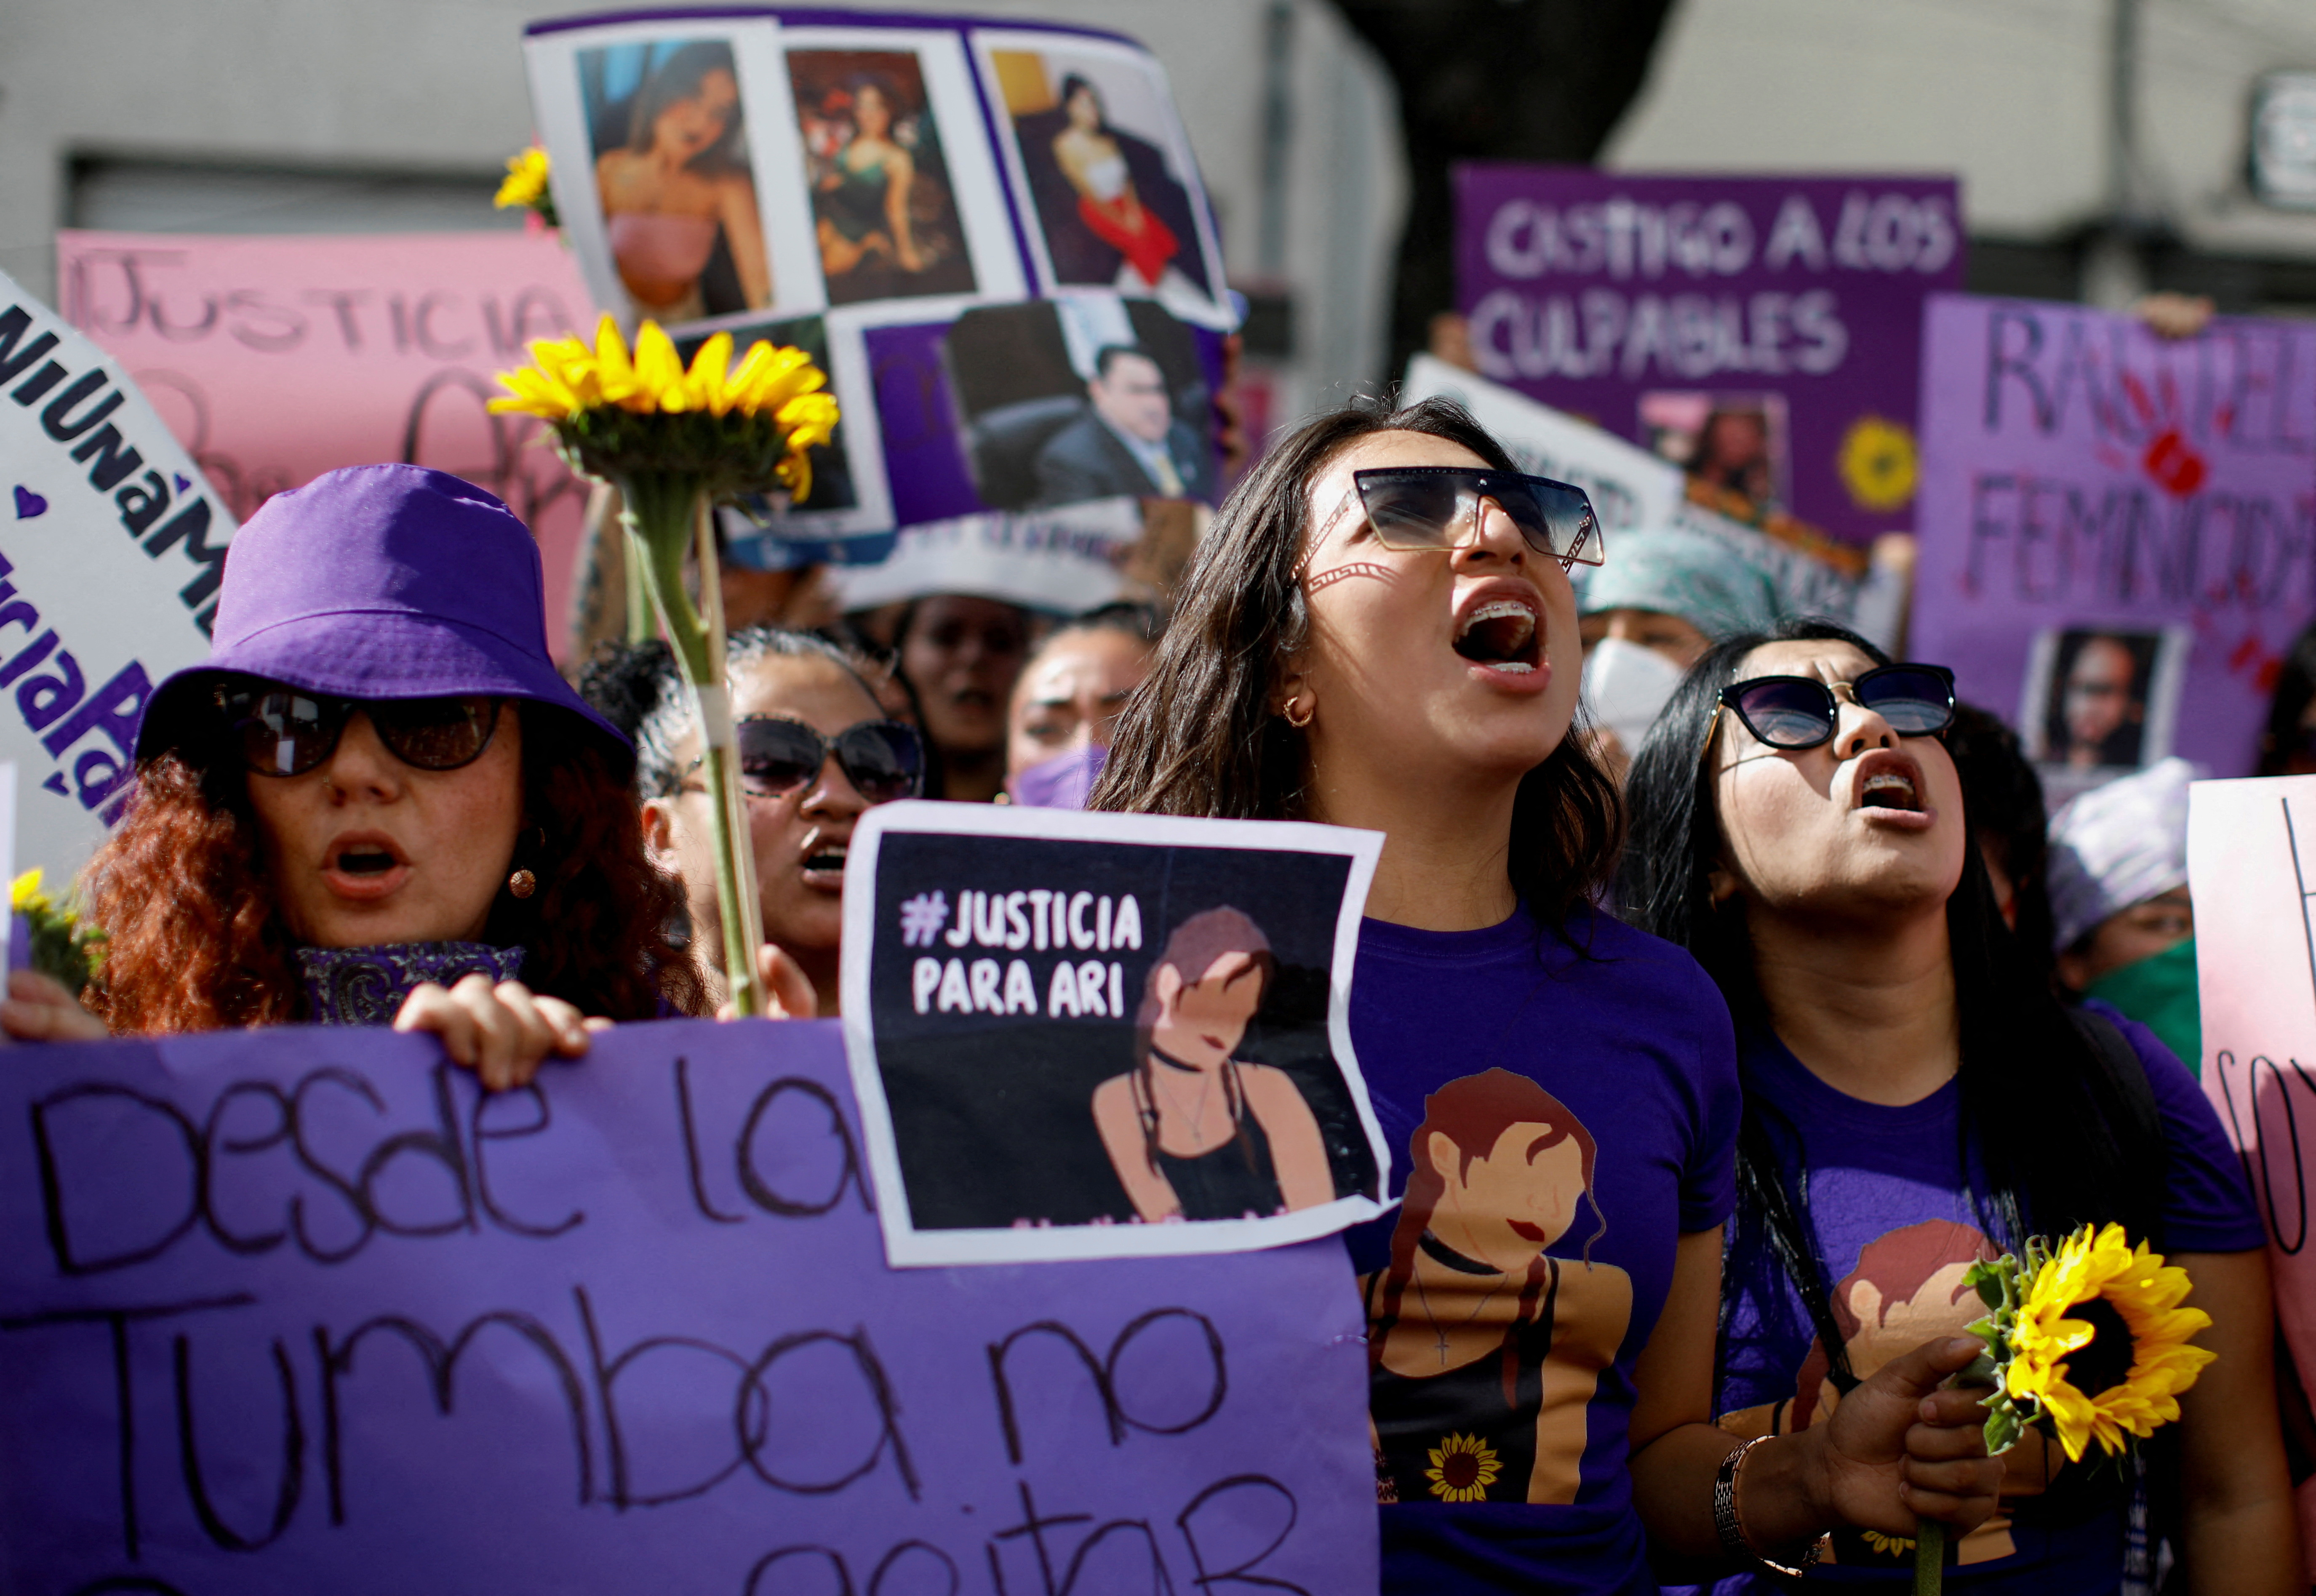 Protest demanding justice after the death of Ariadna Fernanda Lopez, a 27-year-old woman who was found dead on a highway in Morelos state, in Mexico City